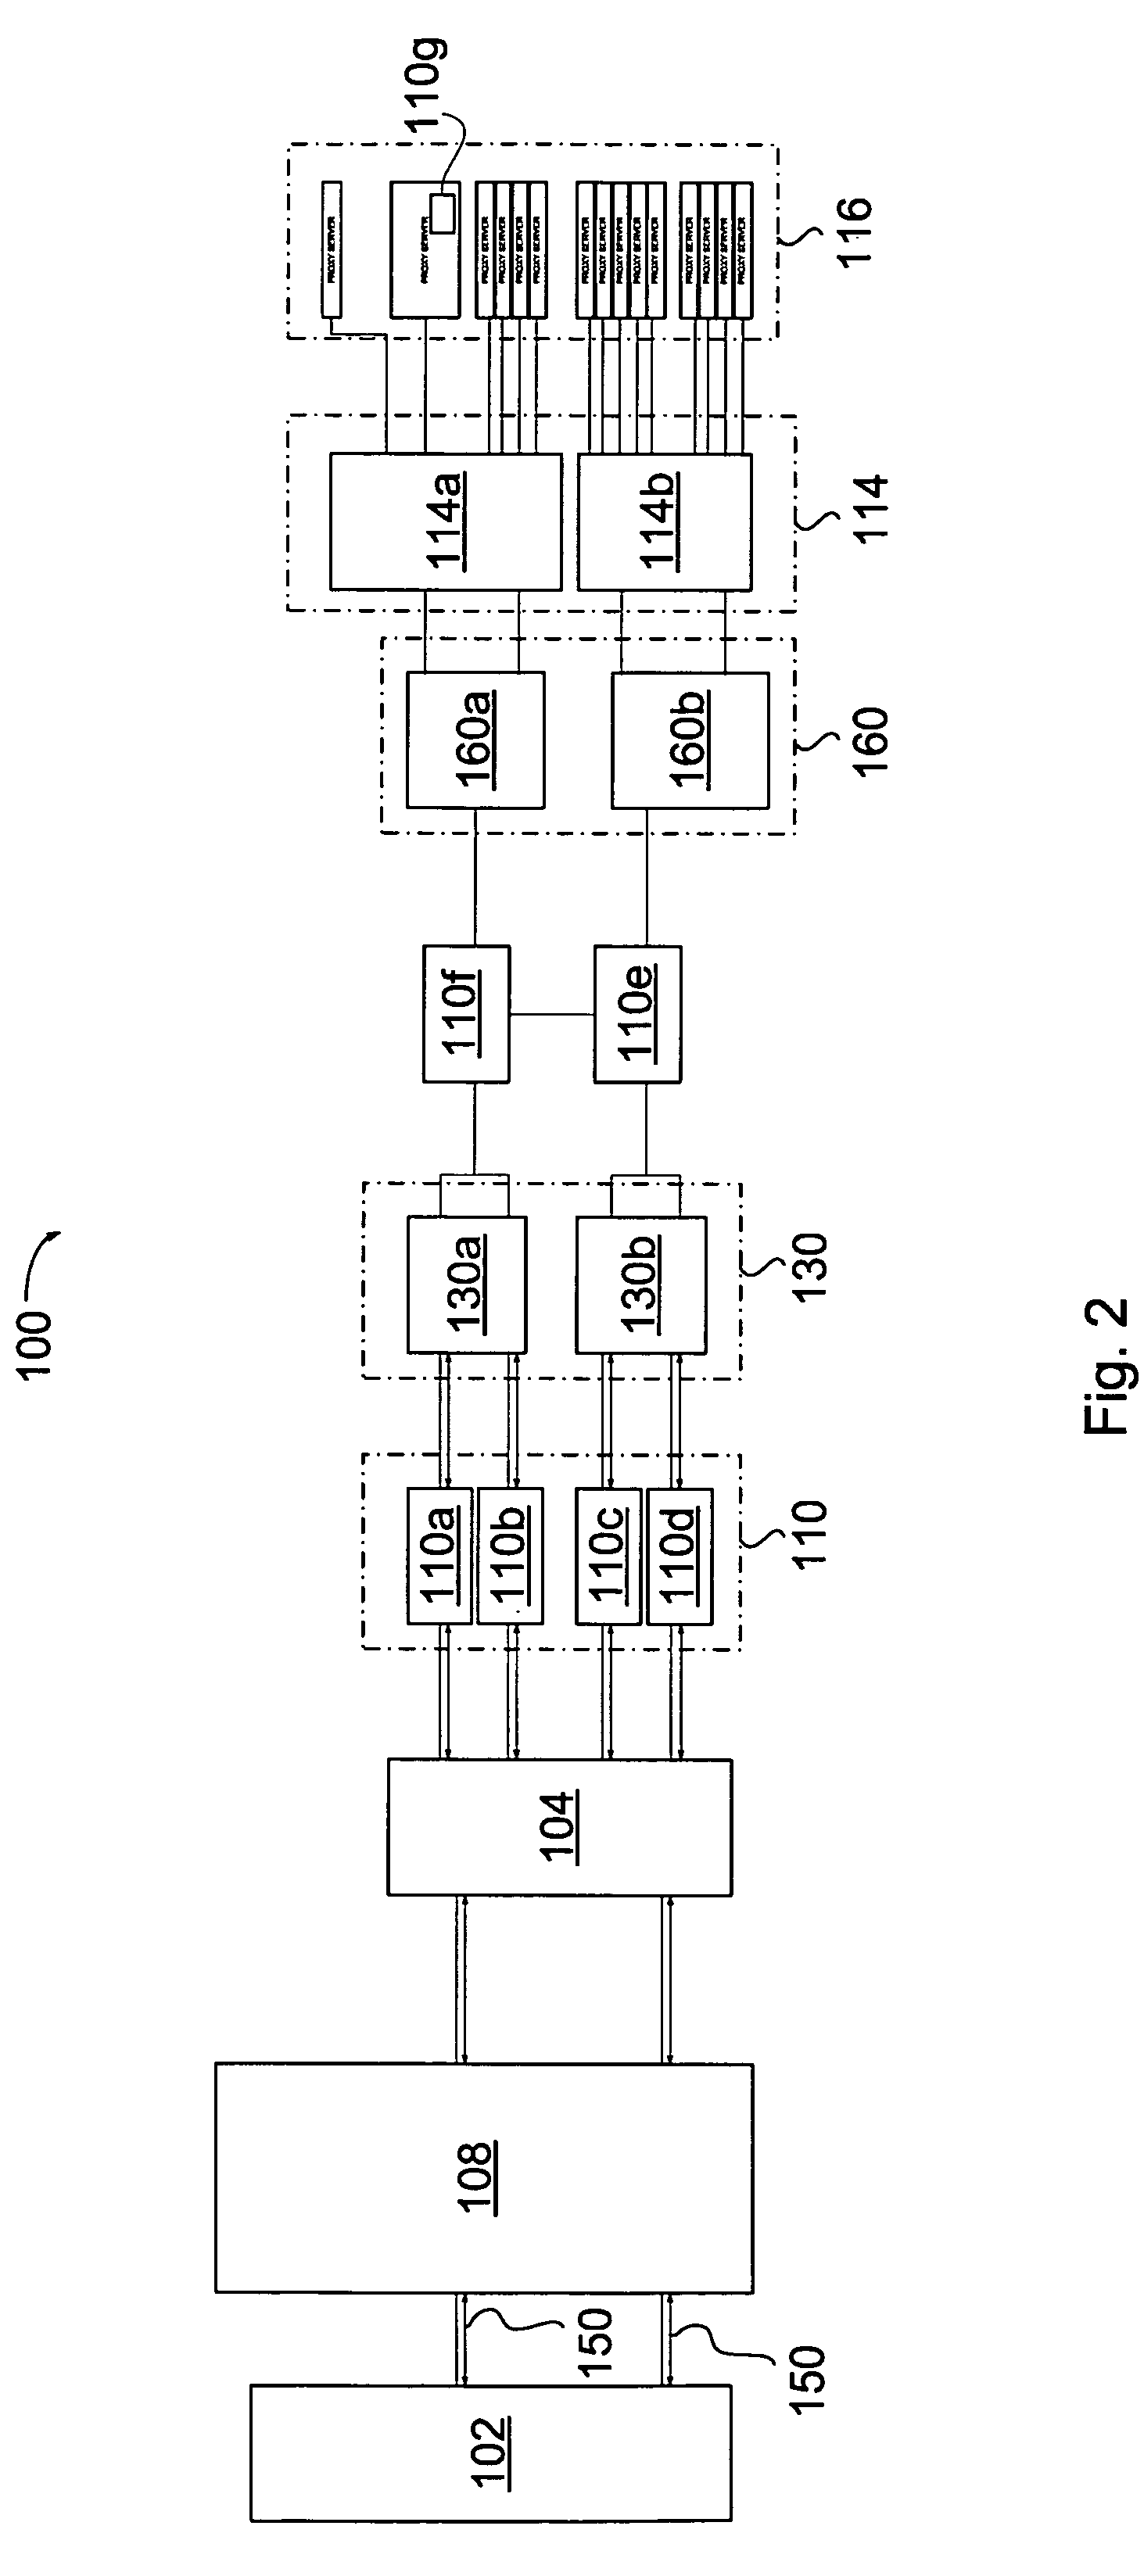 Network overload detection and mitigation system and method